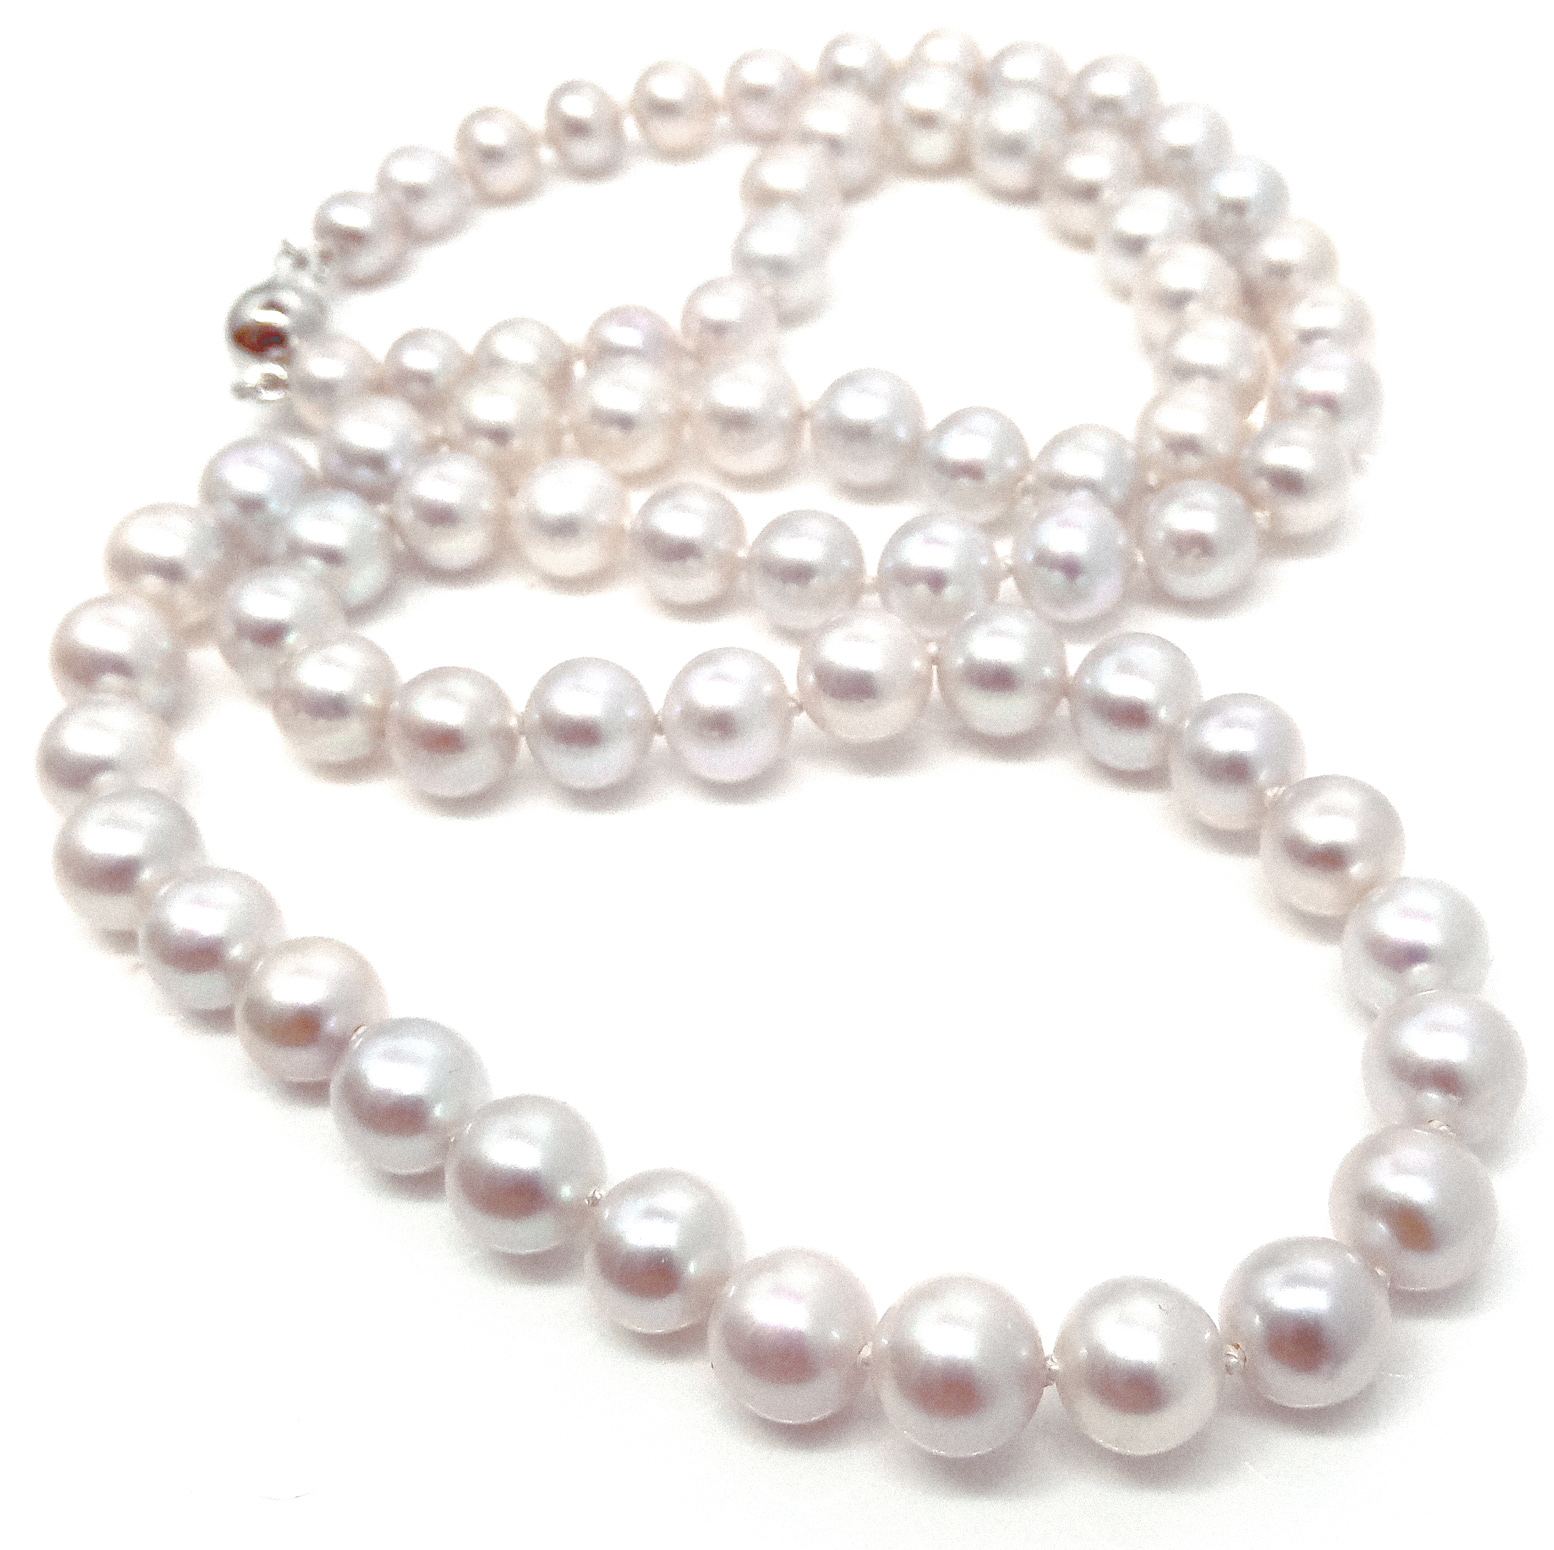 Natural White Akoya Pearls Necklace